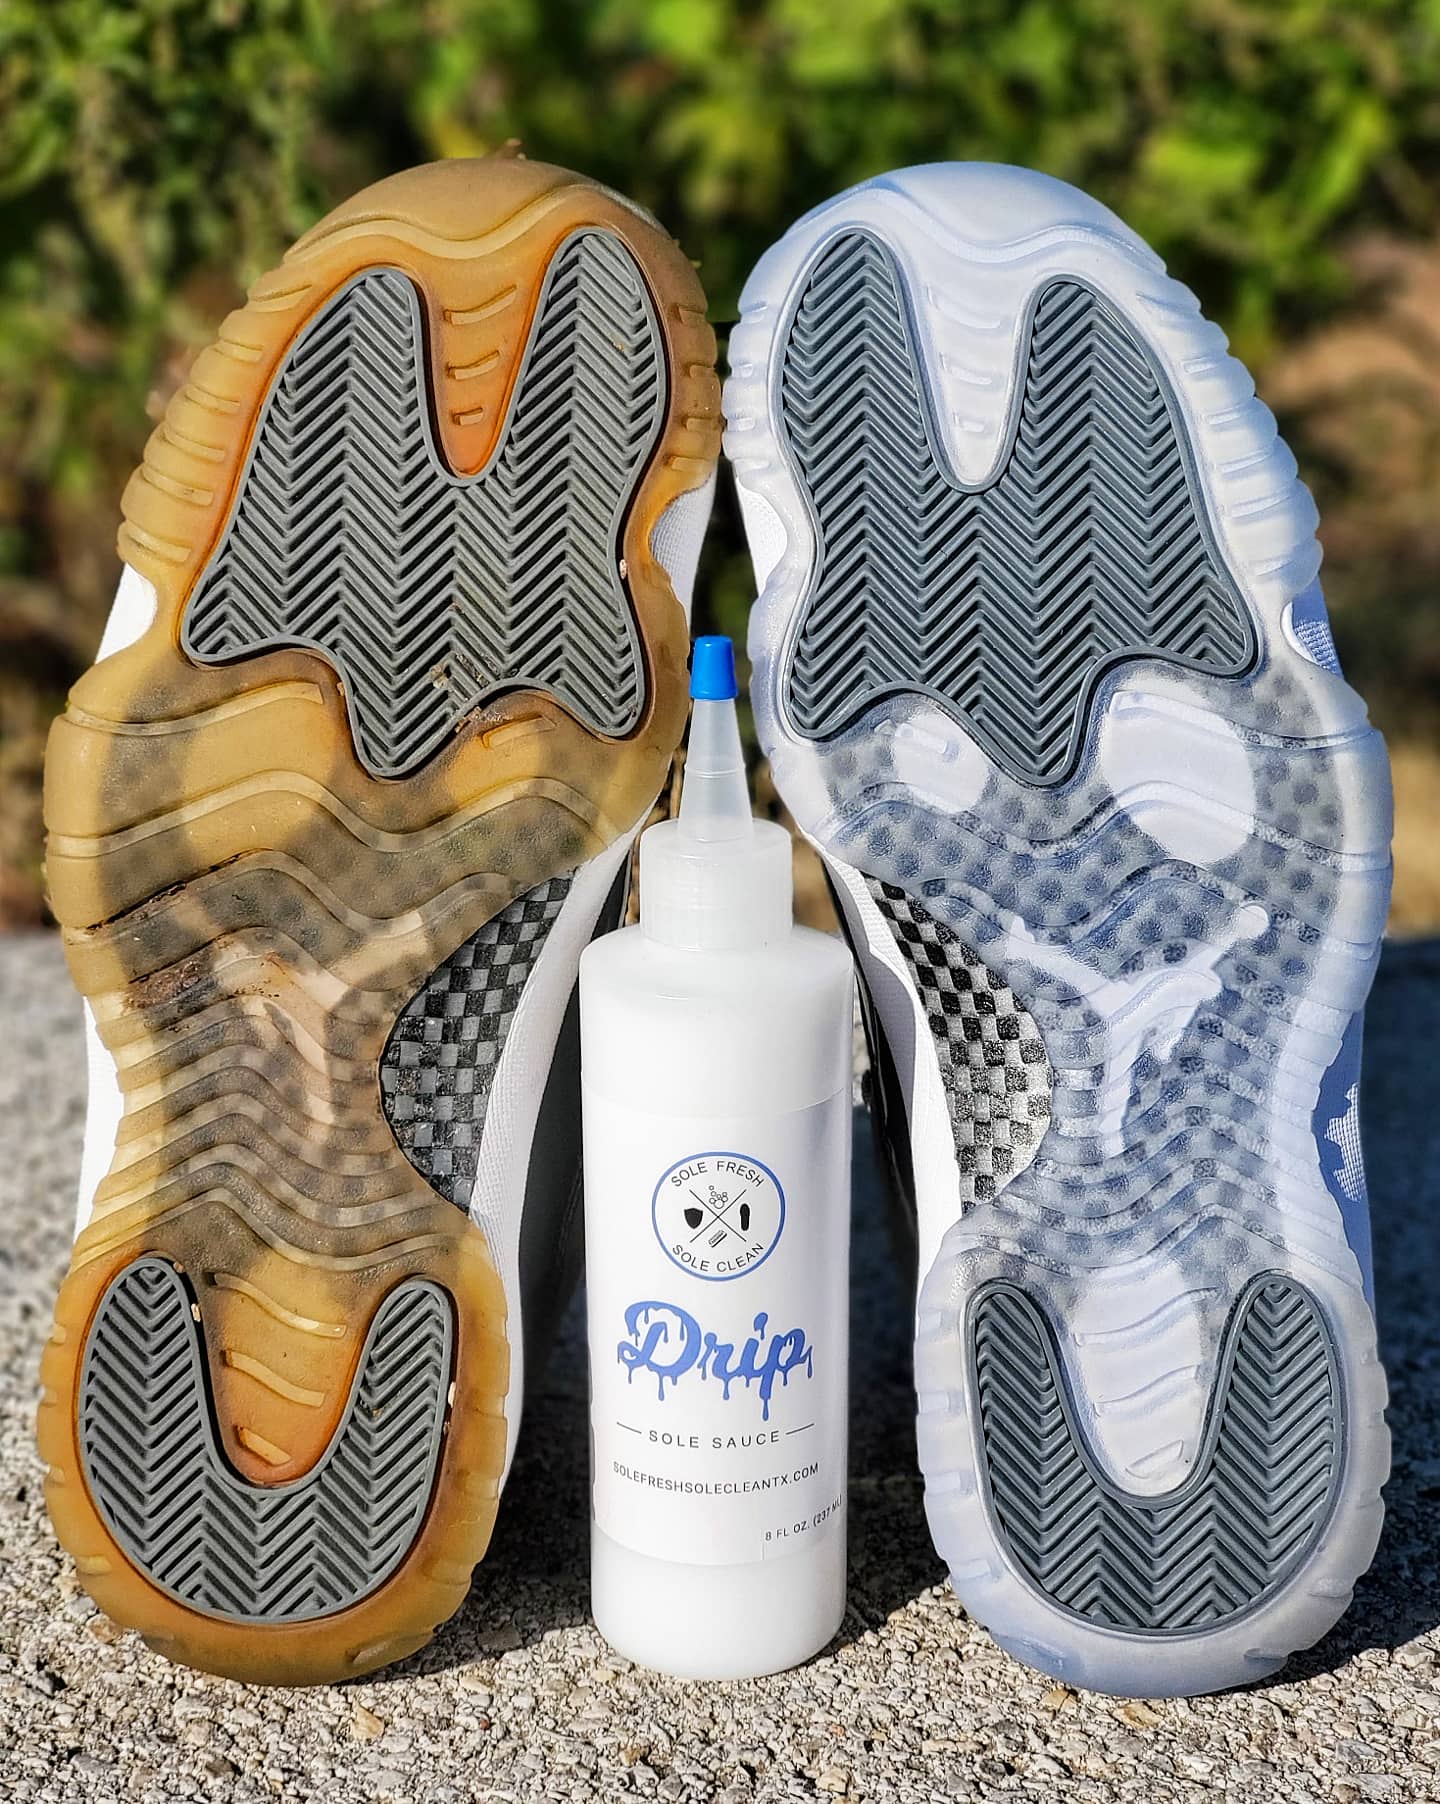 Drip Sole Sauce - Rated The Best Sole 